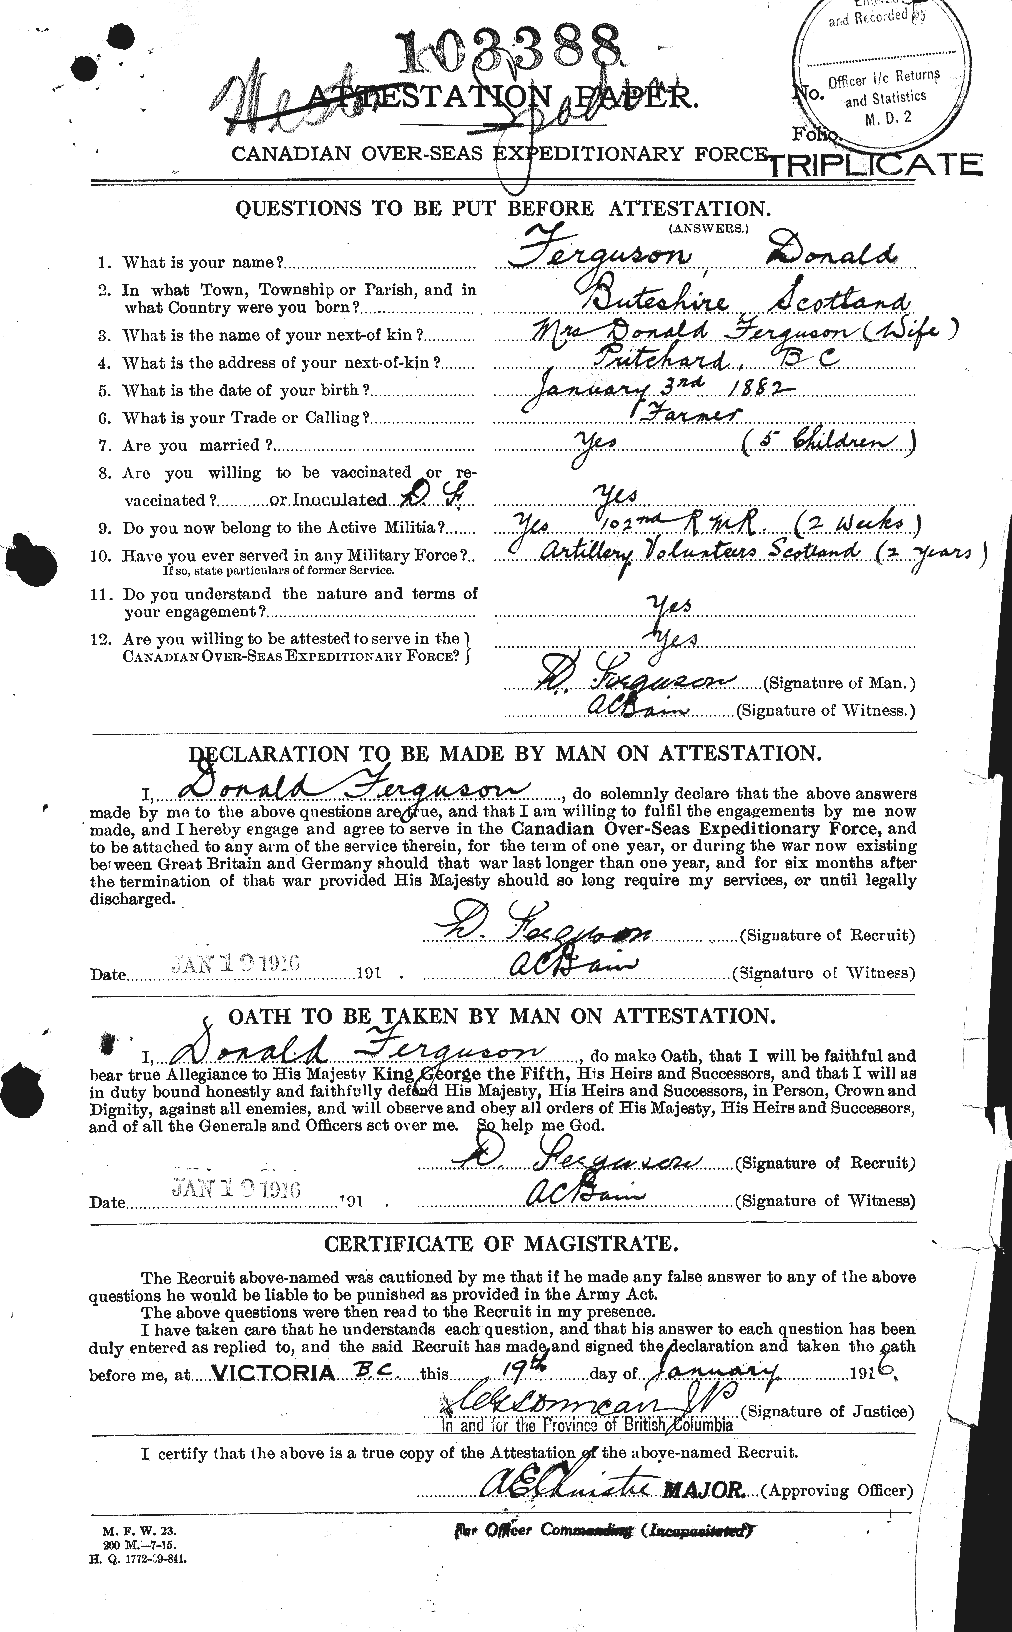 Personnel Records of the First World War - CEF 319002a